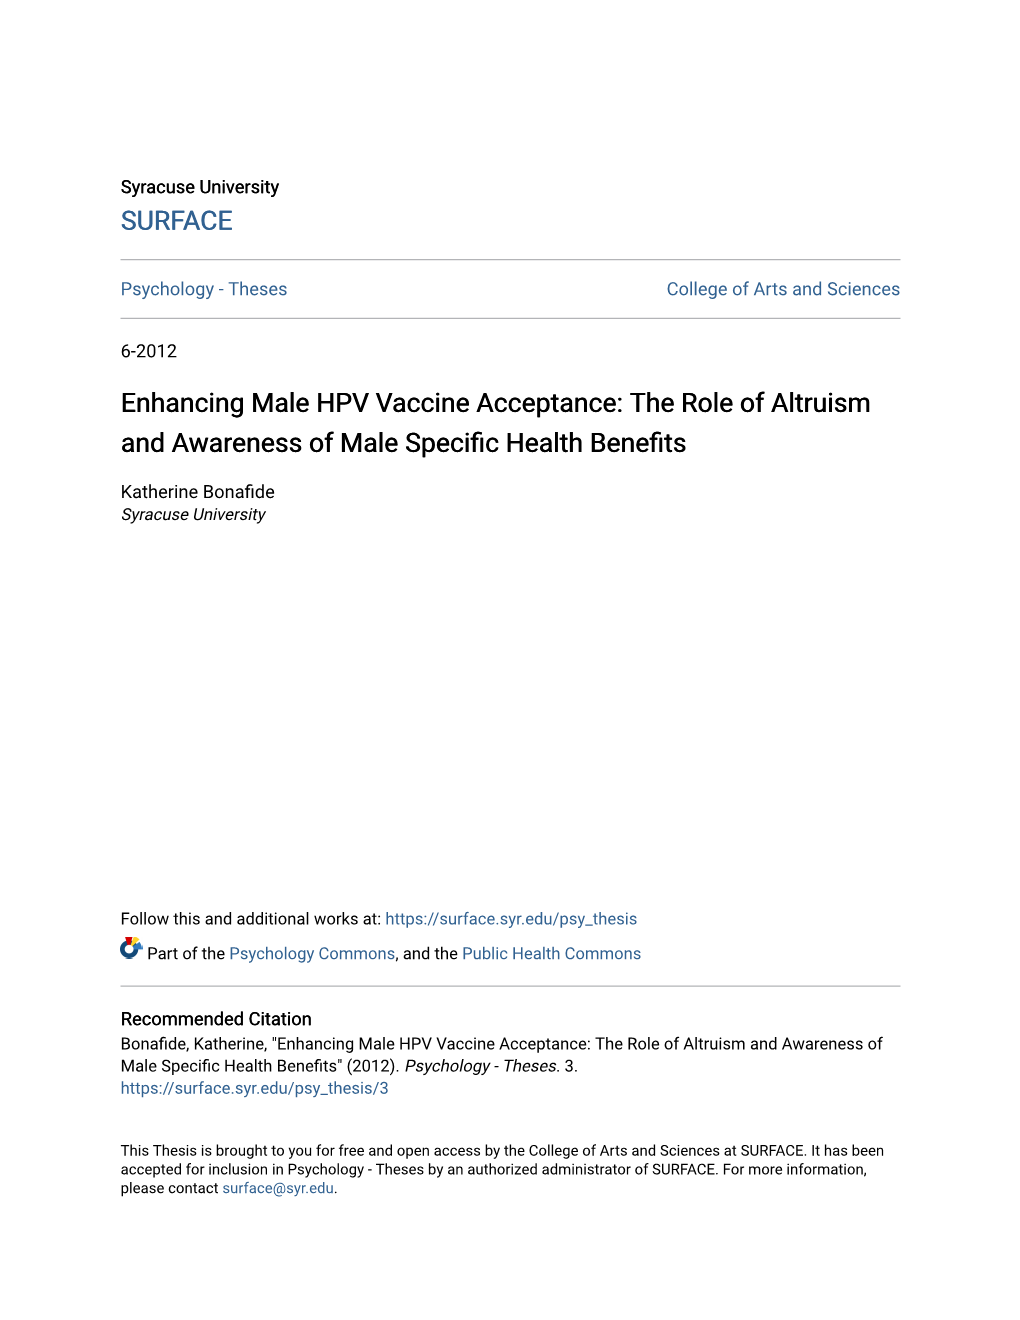 Enhancing Male HPV Vaccine Acceptance: the Role of Altruism and Awareness of Male Specific Health Benefits